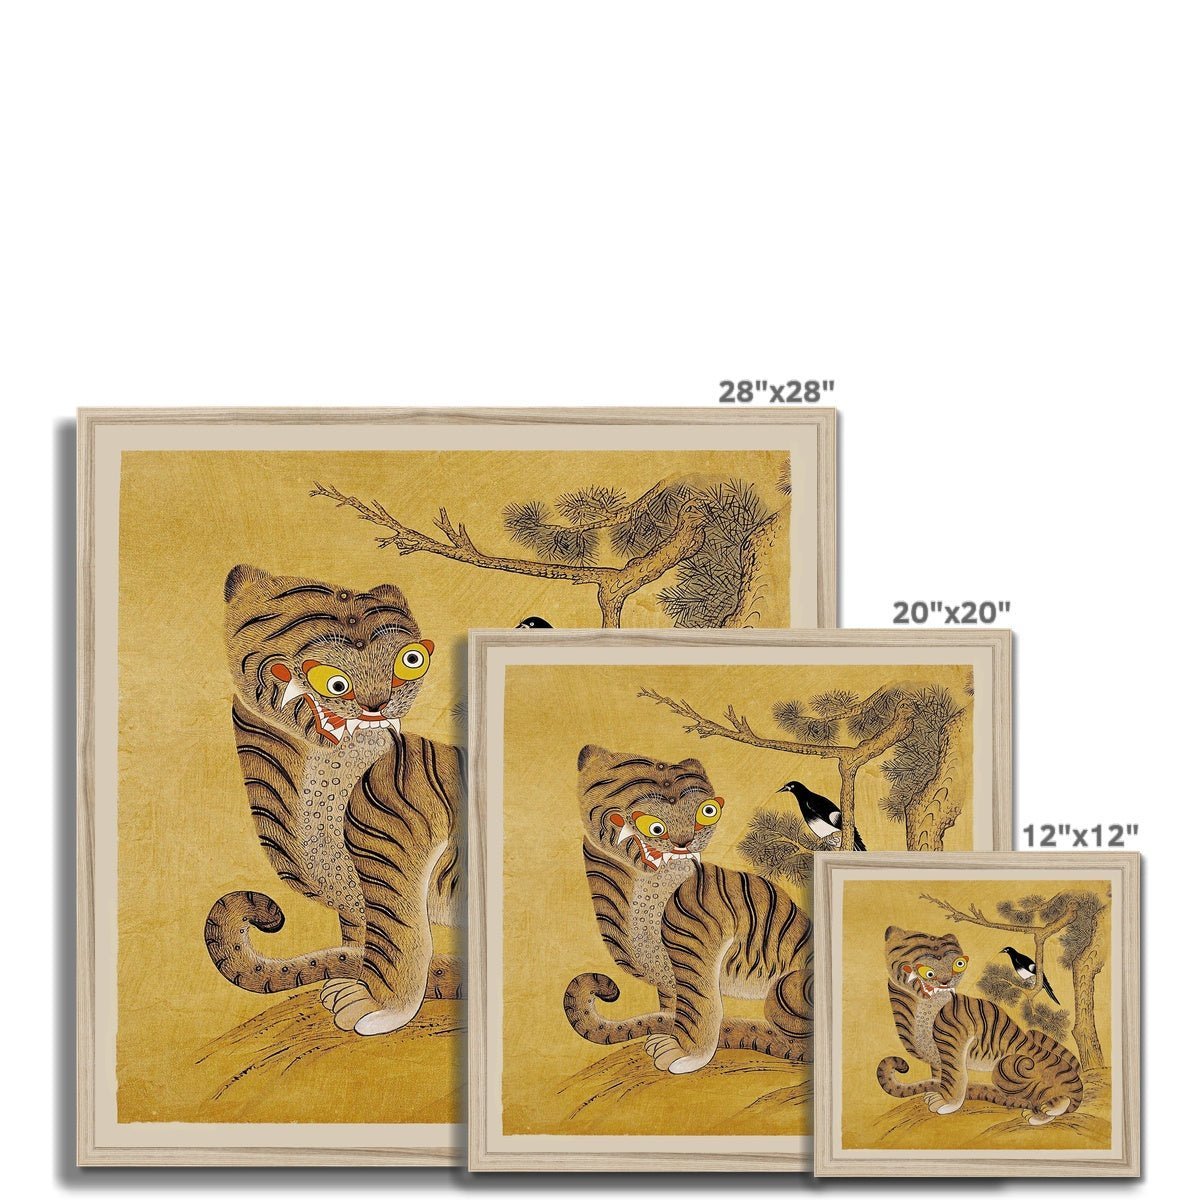 Framed Print Freaky Tiger and Magpie: Korean 19th-Century Minhwa Folk Painting | Vintage Bird Cute Funny Kawaii Gift | Lion Leopard Poster Framed Print